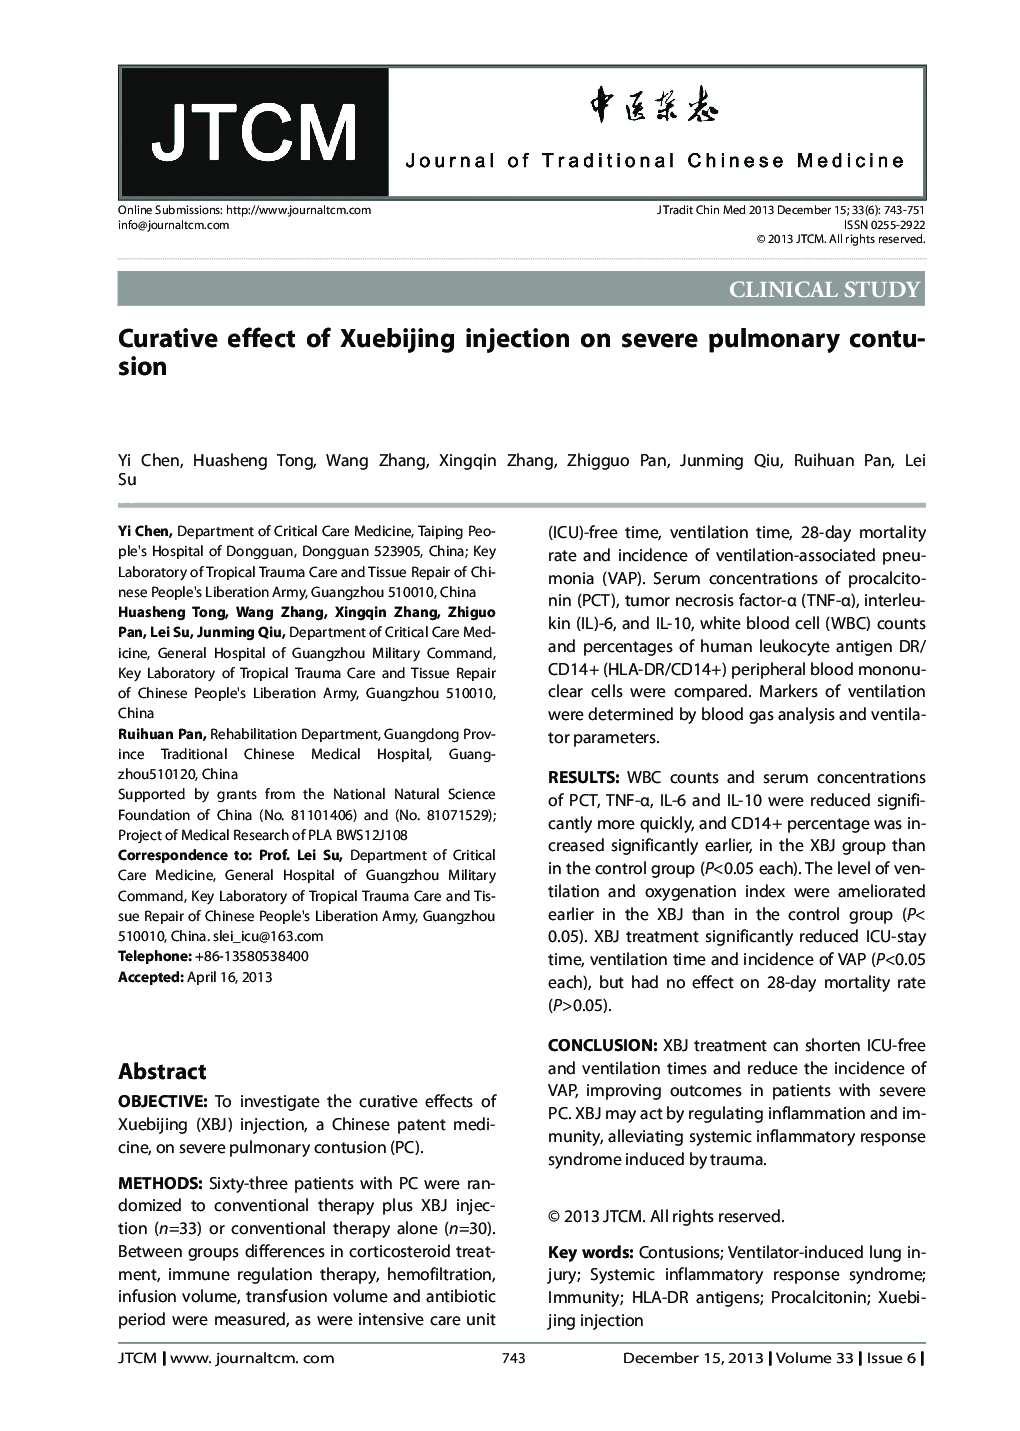 Curative effect of Xuebijing injection on severe pulmonary contusion 